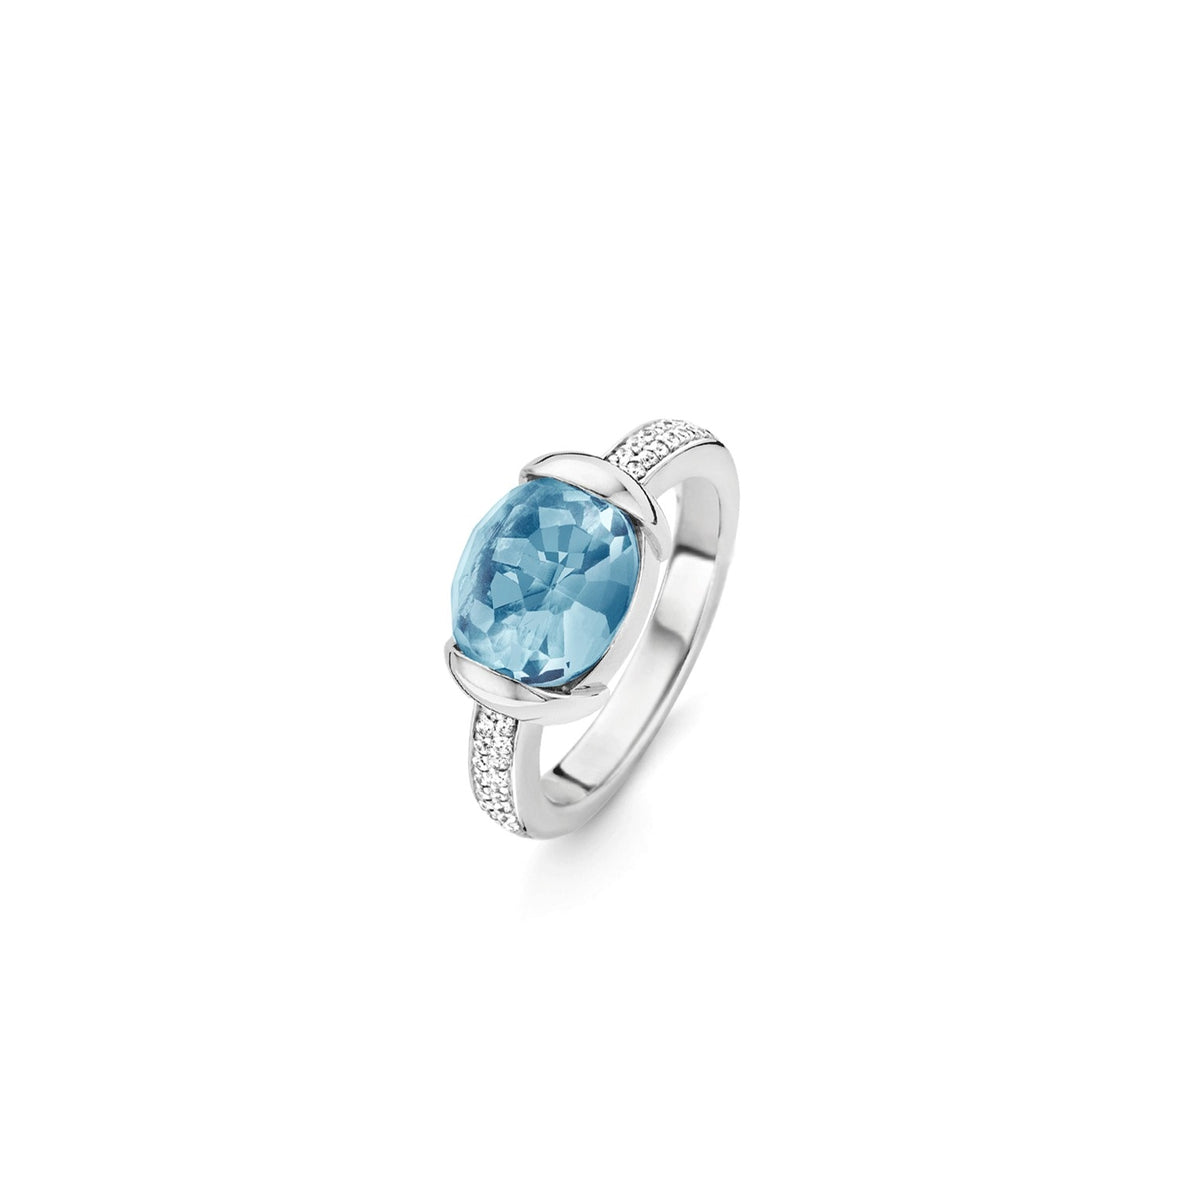 TI SENTO Sterling Silver Ring with Faceted Oval Blue Stone and Cubic Zirconia Shank